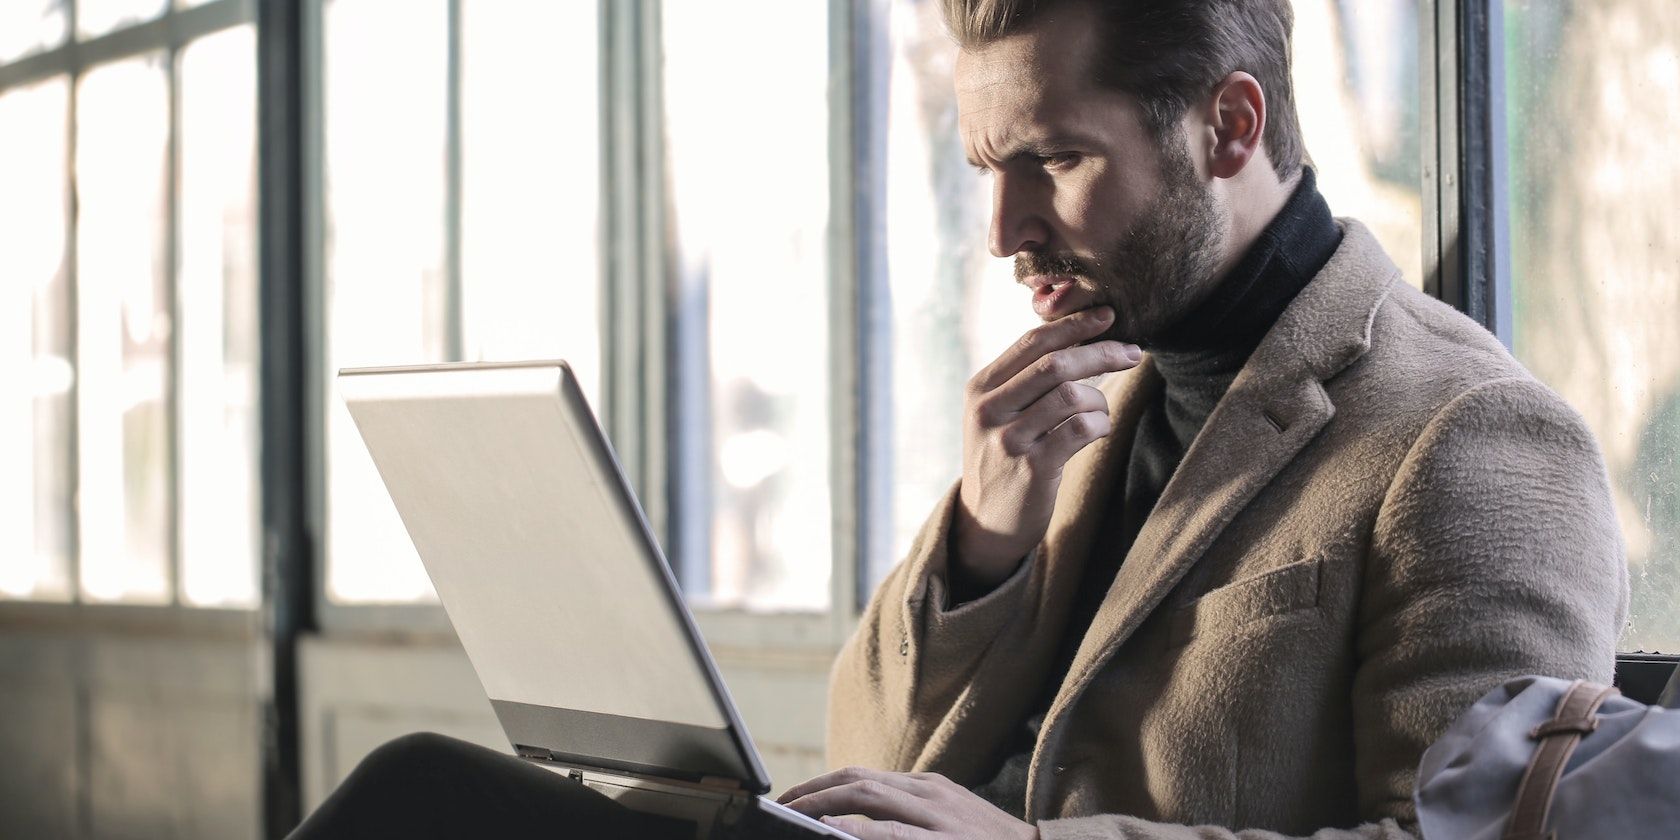 Man with laptop looking pensive